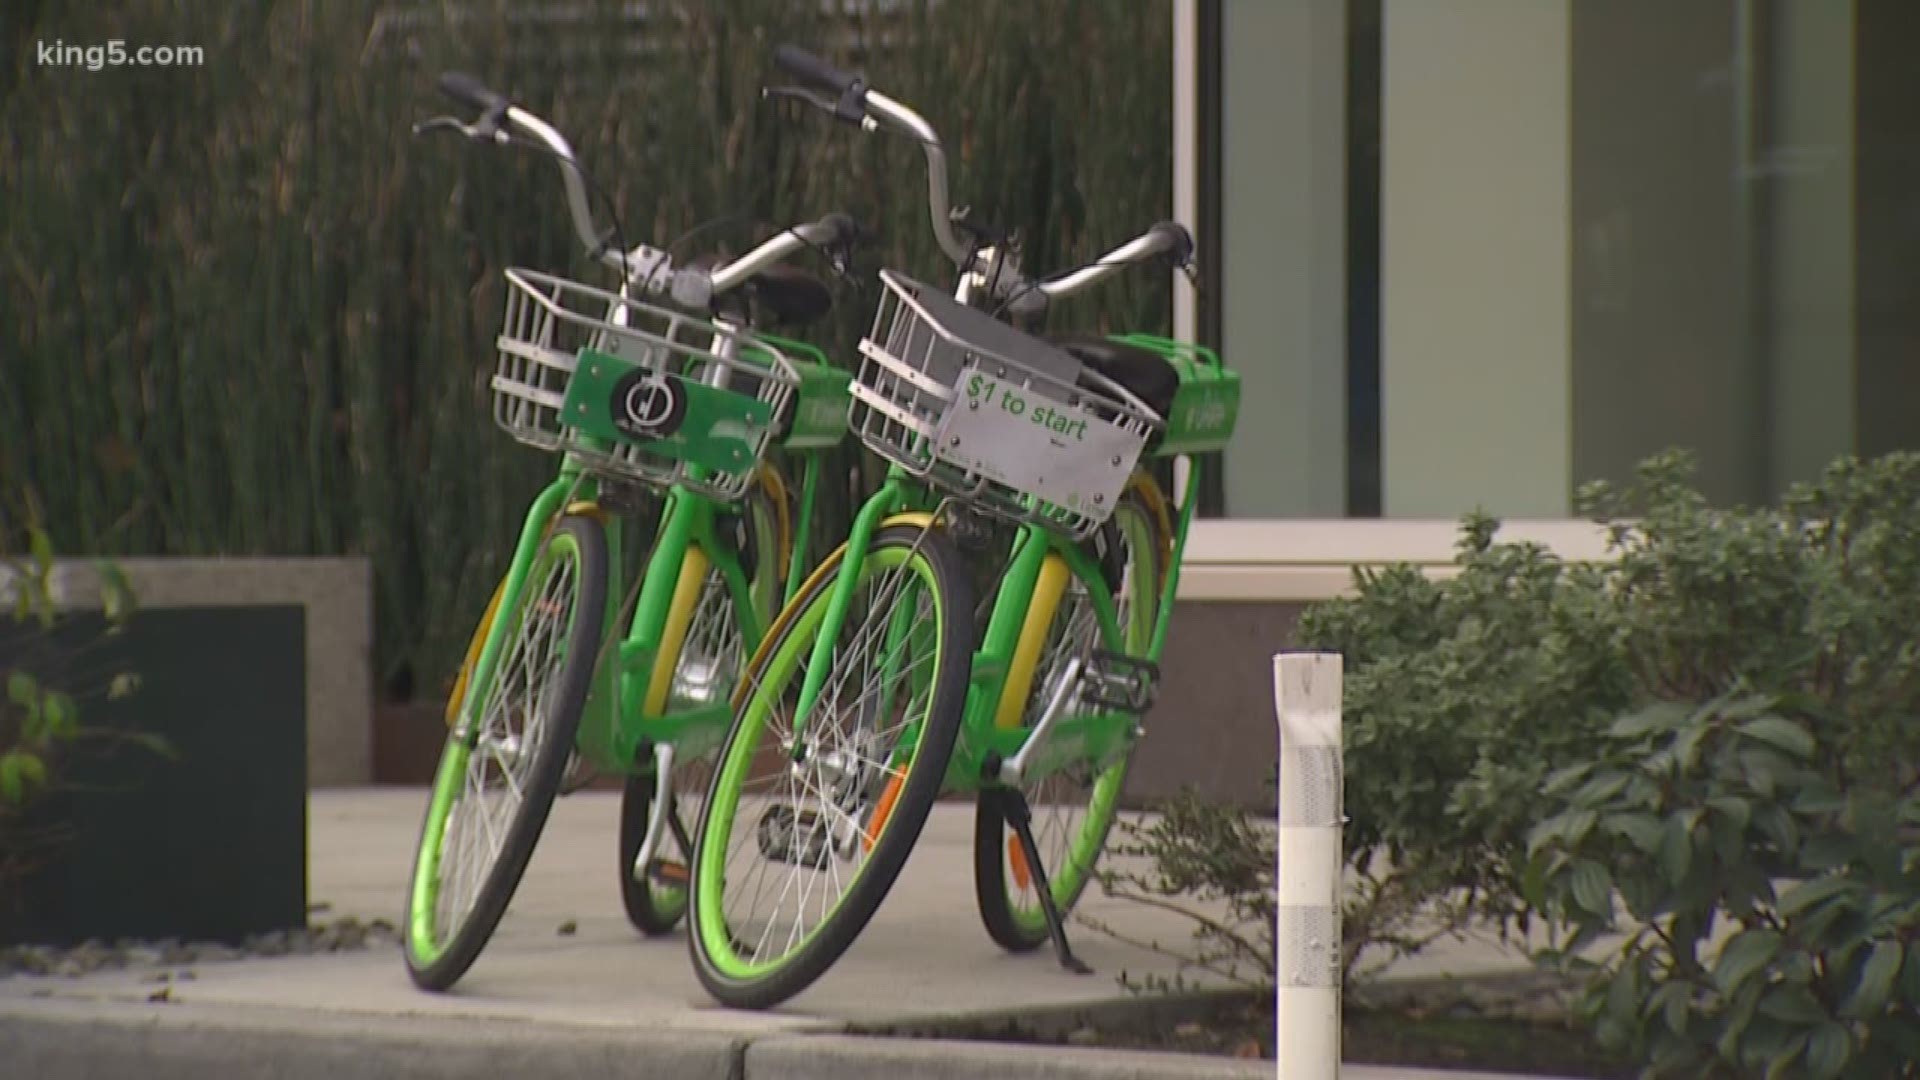 Lime announced it's pulling it's fleet by the end of the year, which will remove yet another shared method of transportation from Seattle.